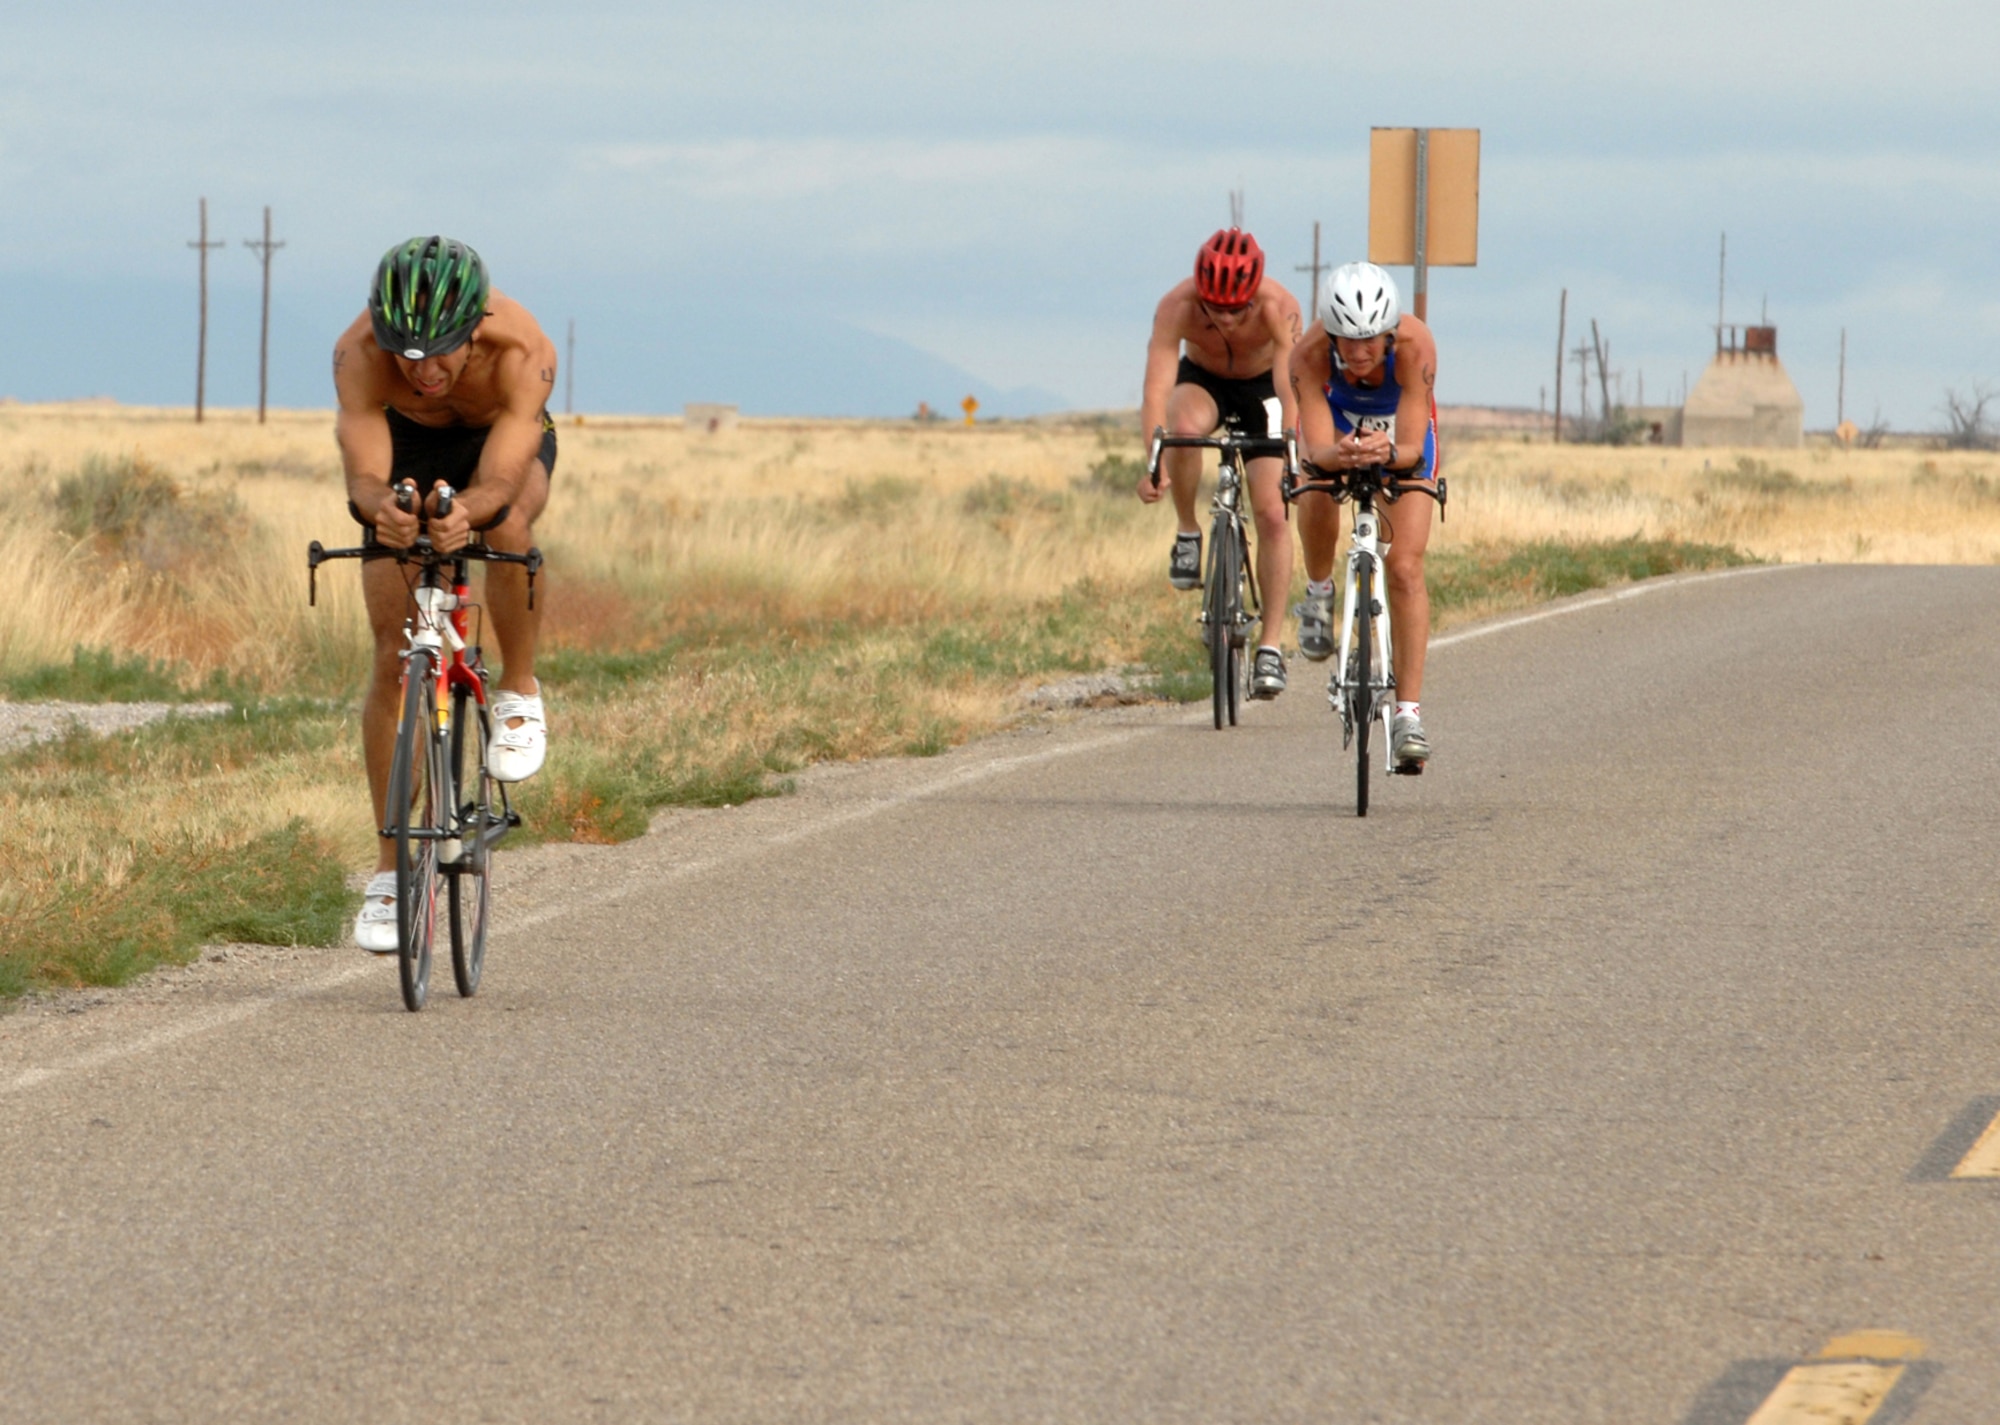 Athletes participating in the annual Triathlon bike 30K after a 5K run at Holloman Air Force Base, N.M., October 12. The Triathlon was open to everyone who signed up and more than 60 athletes participated. (U.S. Air Force photo/Airman Sondra M. Escutia)